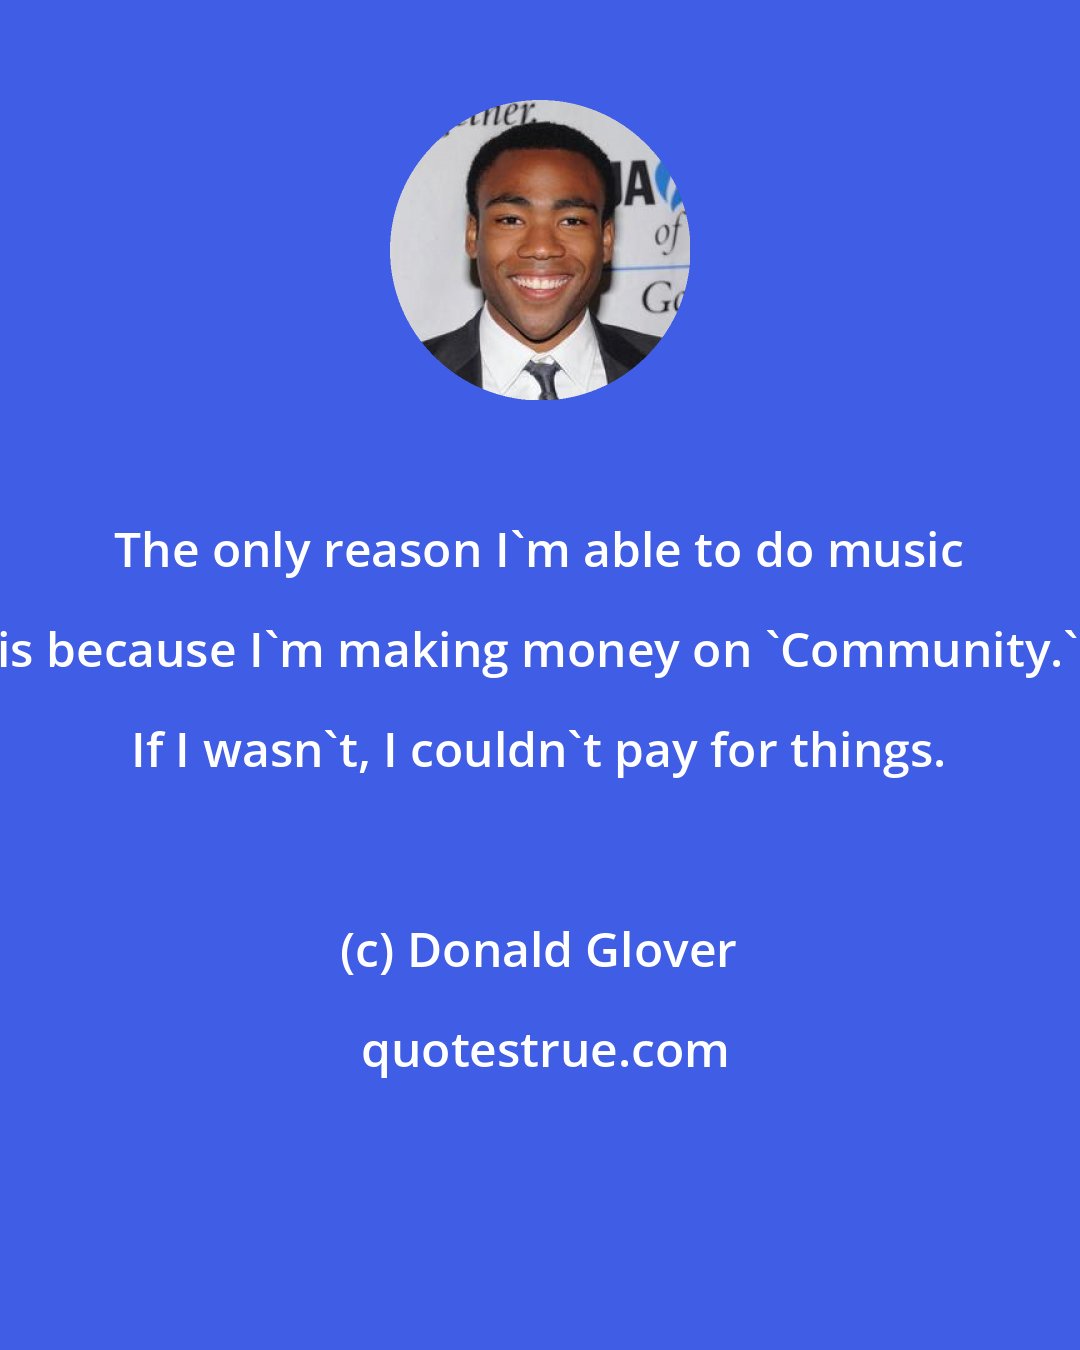 Donald Glover: The only reason I'm able to do music is because I'm making money on 'Community.' If I wasn't, I couldn't pay for things.